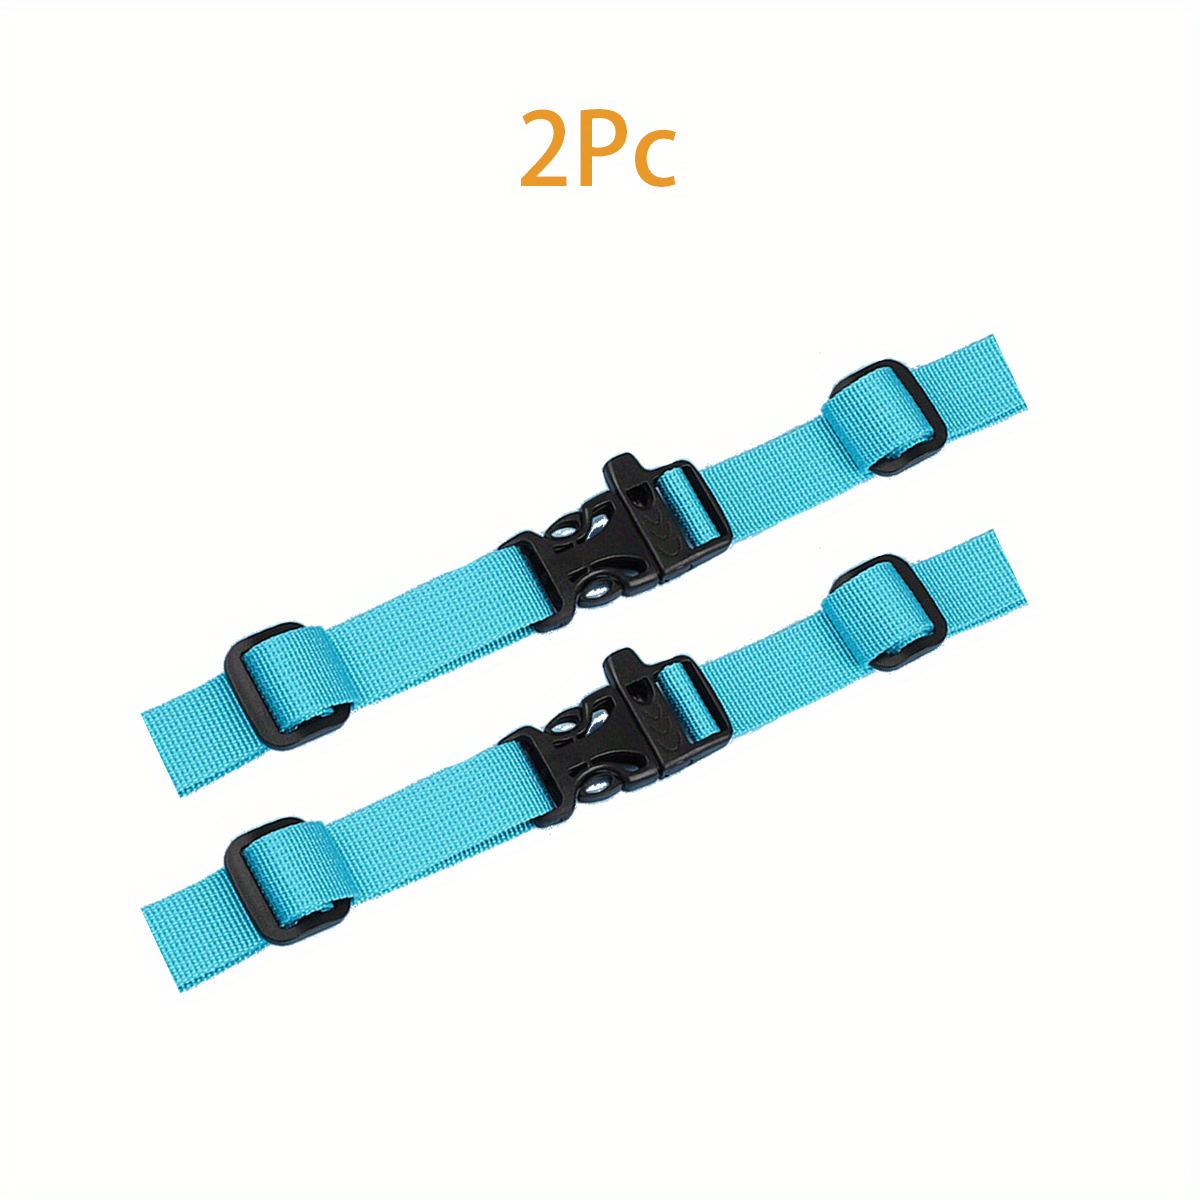 Merotable Clearance! 4pcs Straps Backpack Accessory Straps Buckle Outdoor Sports Climbing Hiking Bag Chest Straps, Adult Unisex, Size: 14 x 1.3, Green